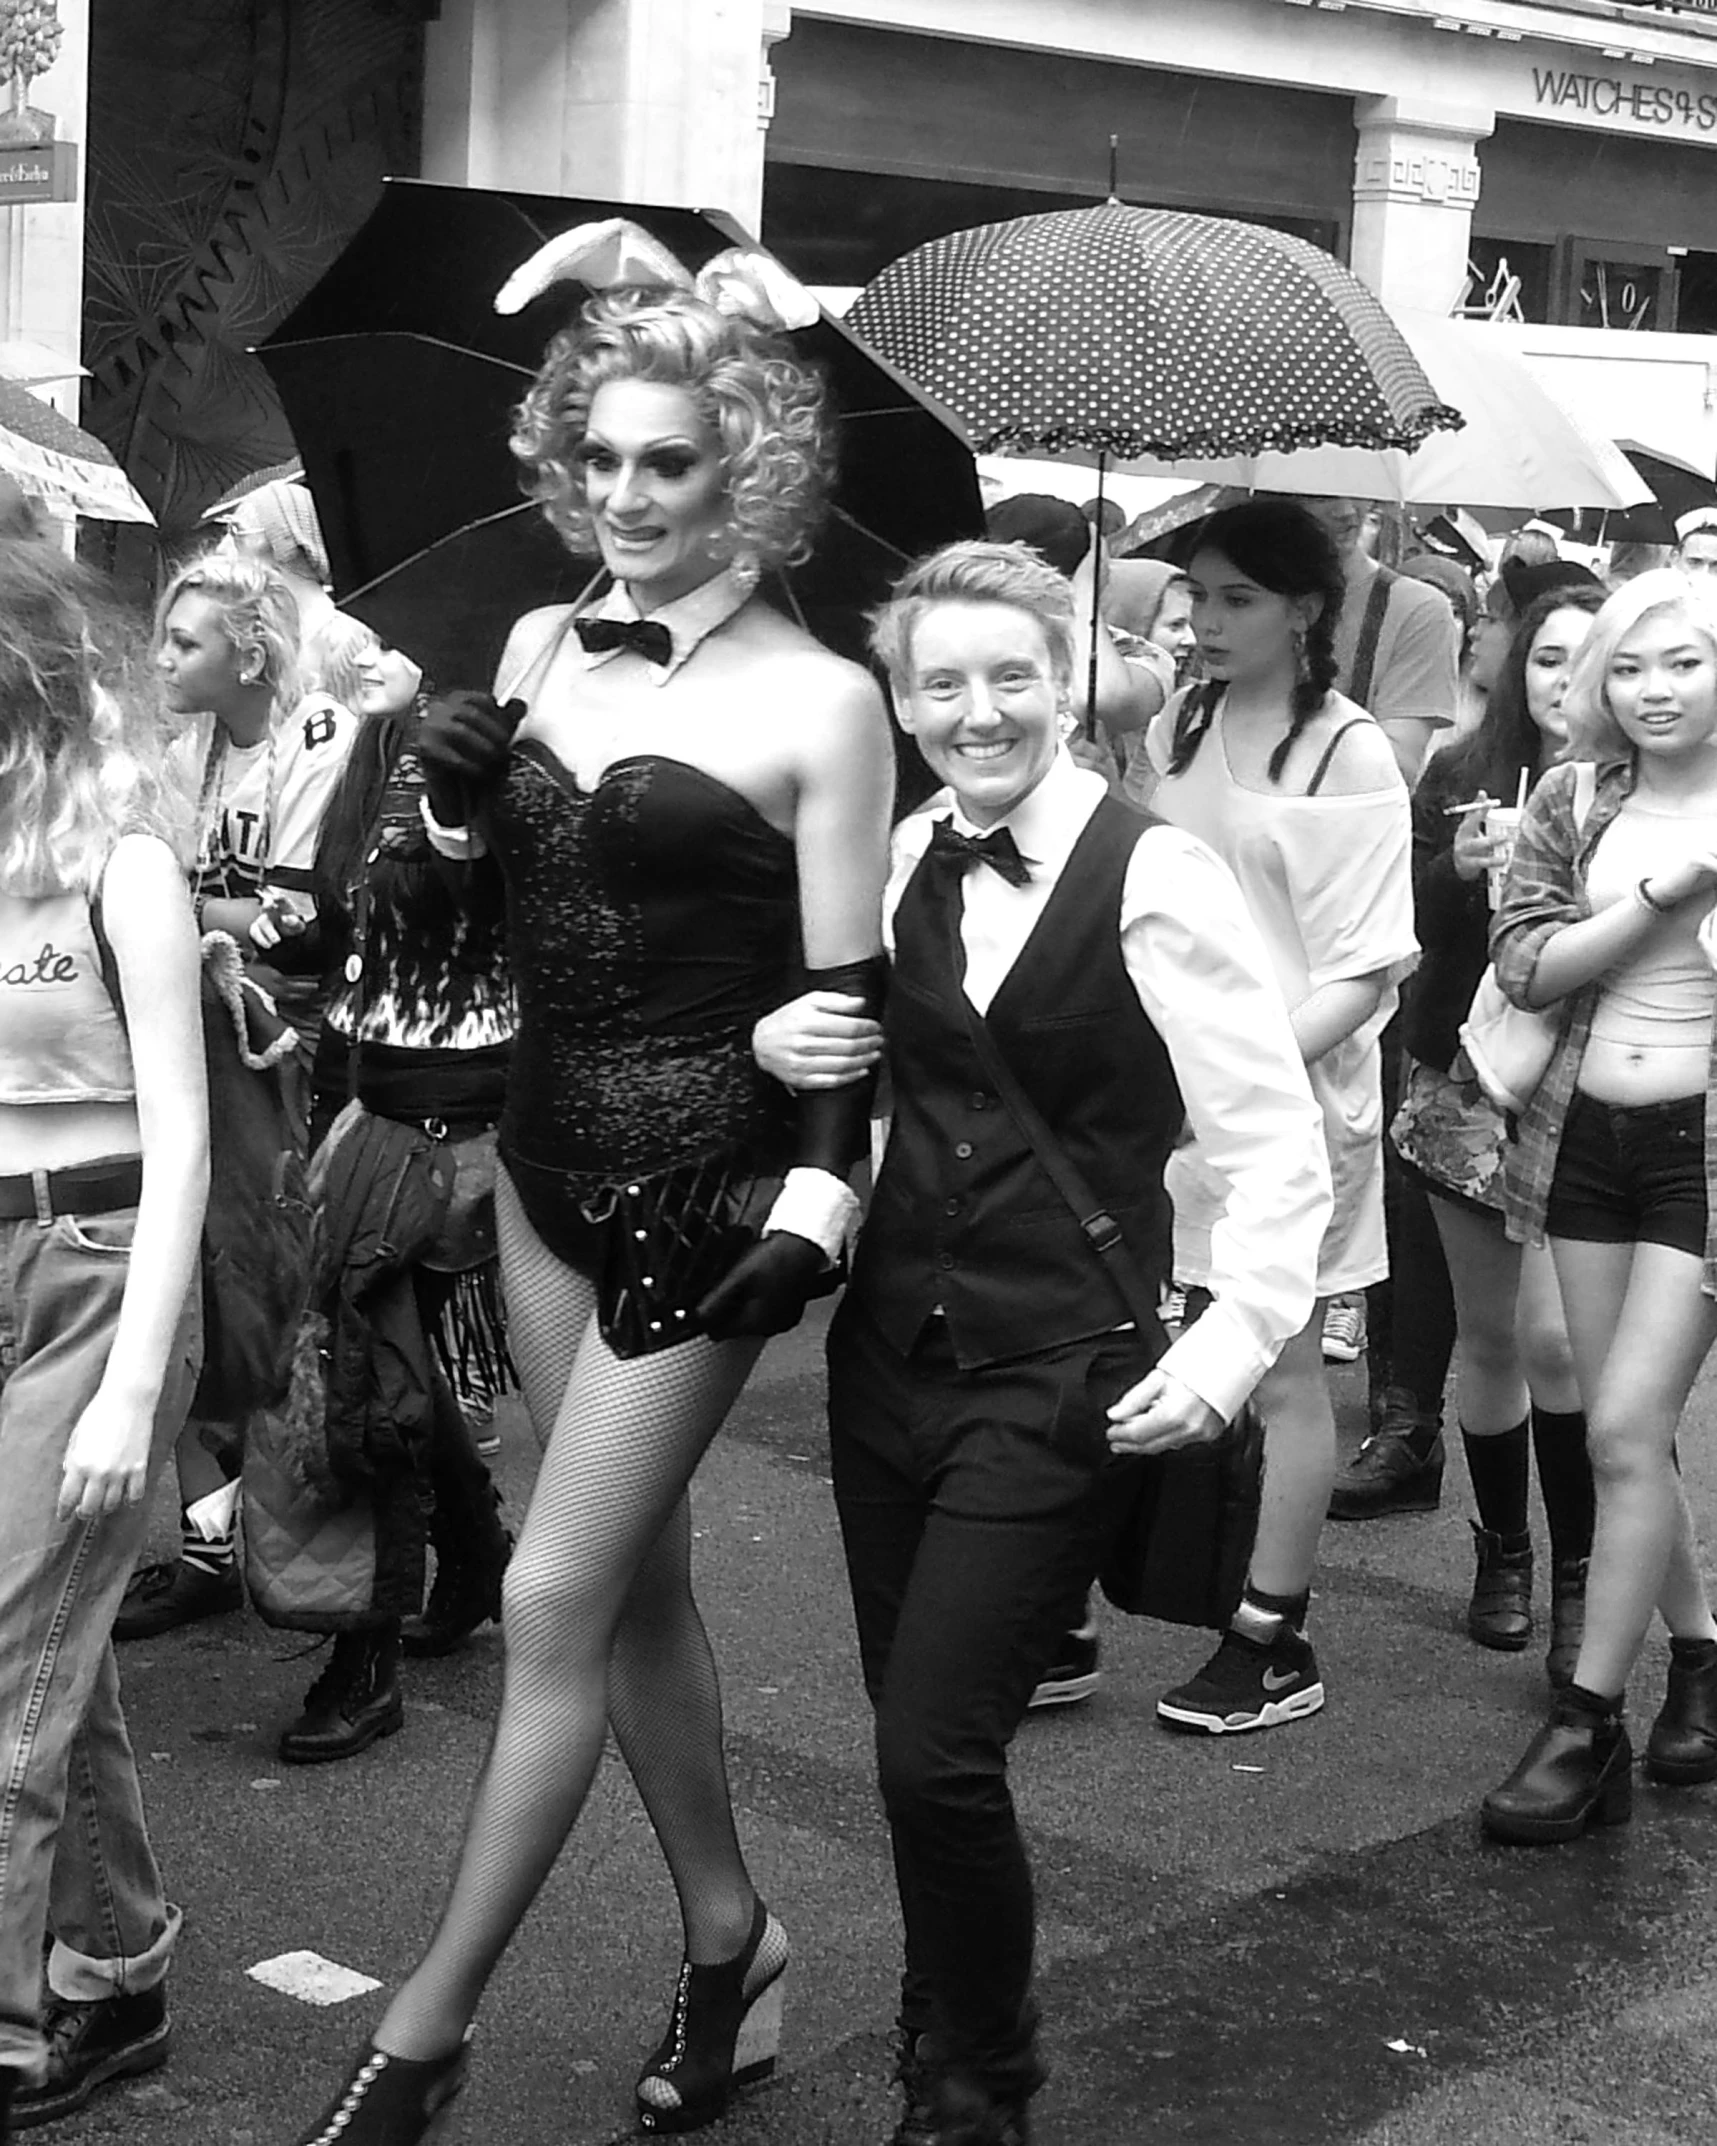 men and women dressed in drag type outfits walk down a crowded street